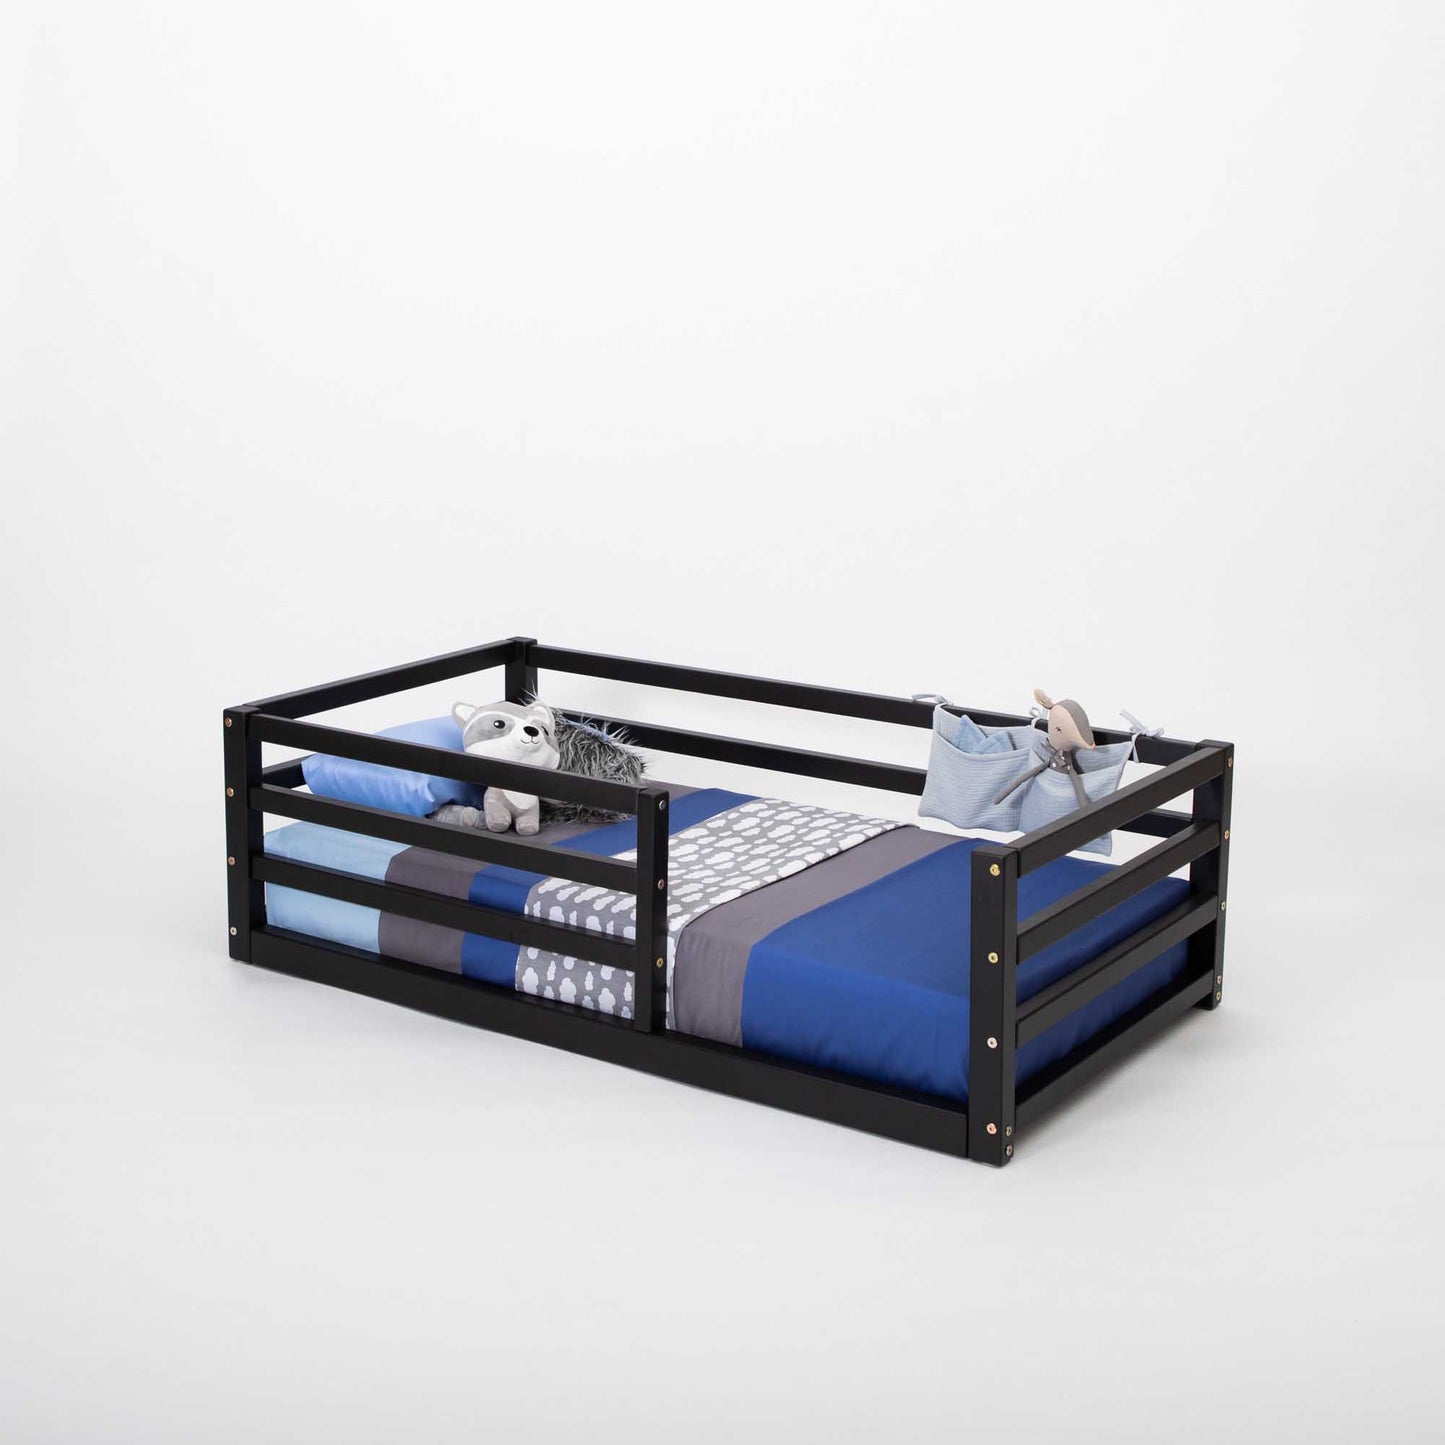 A Sweet Home From Wood 2-in-1 transformable kids' bed with a horizontal rail fence and blue and white bedding.